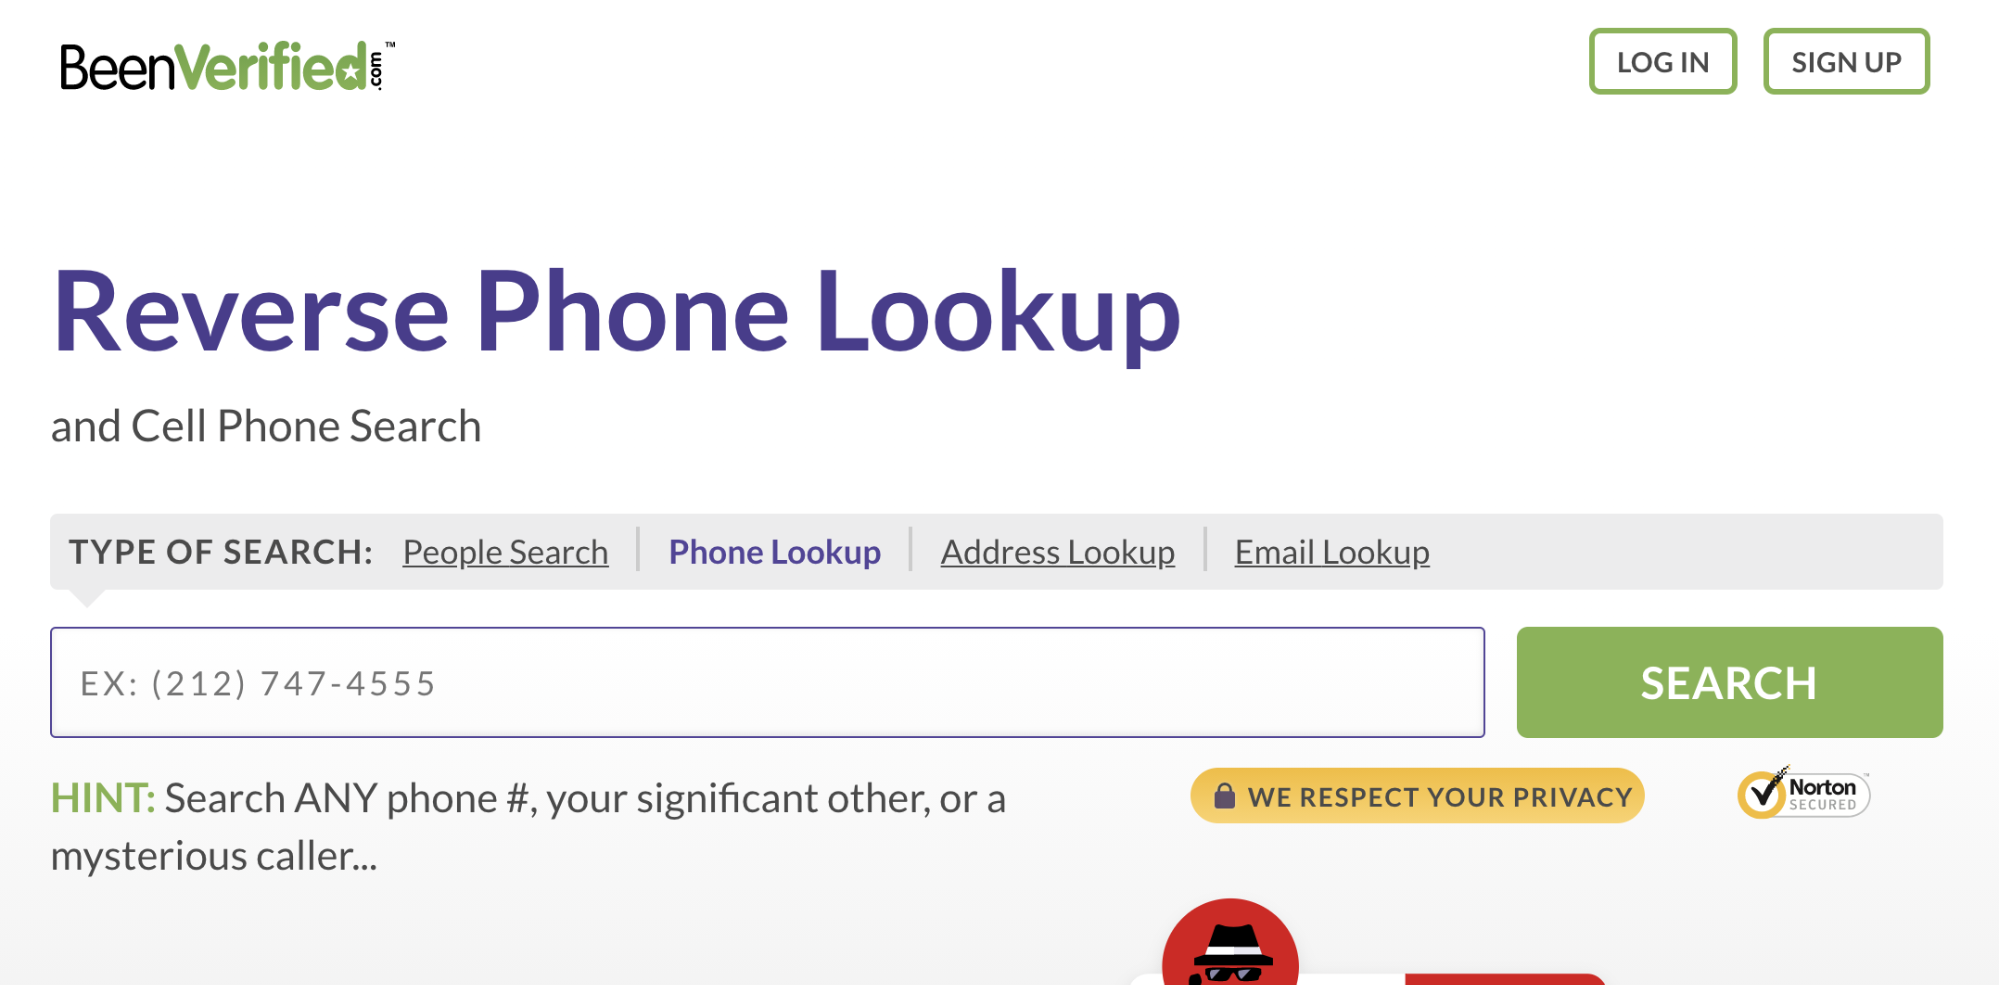 Google Phone Number Lookup - Does it Still Work?